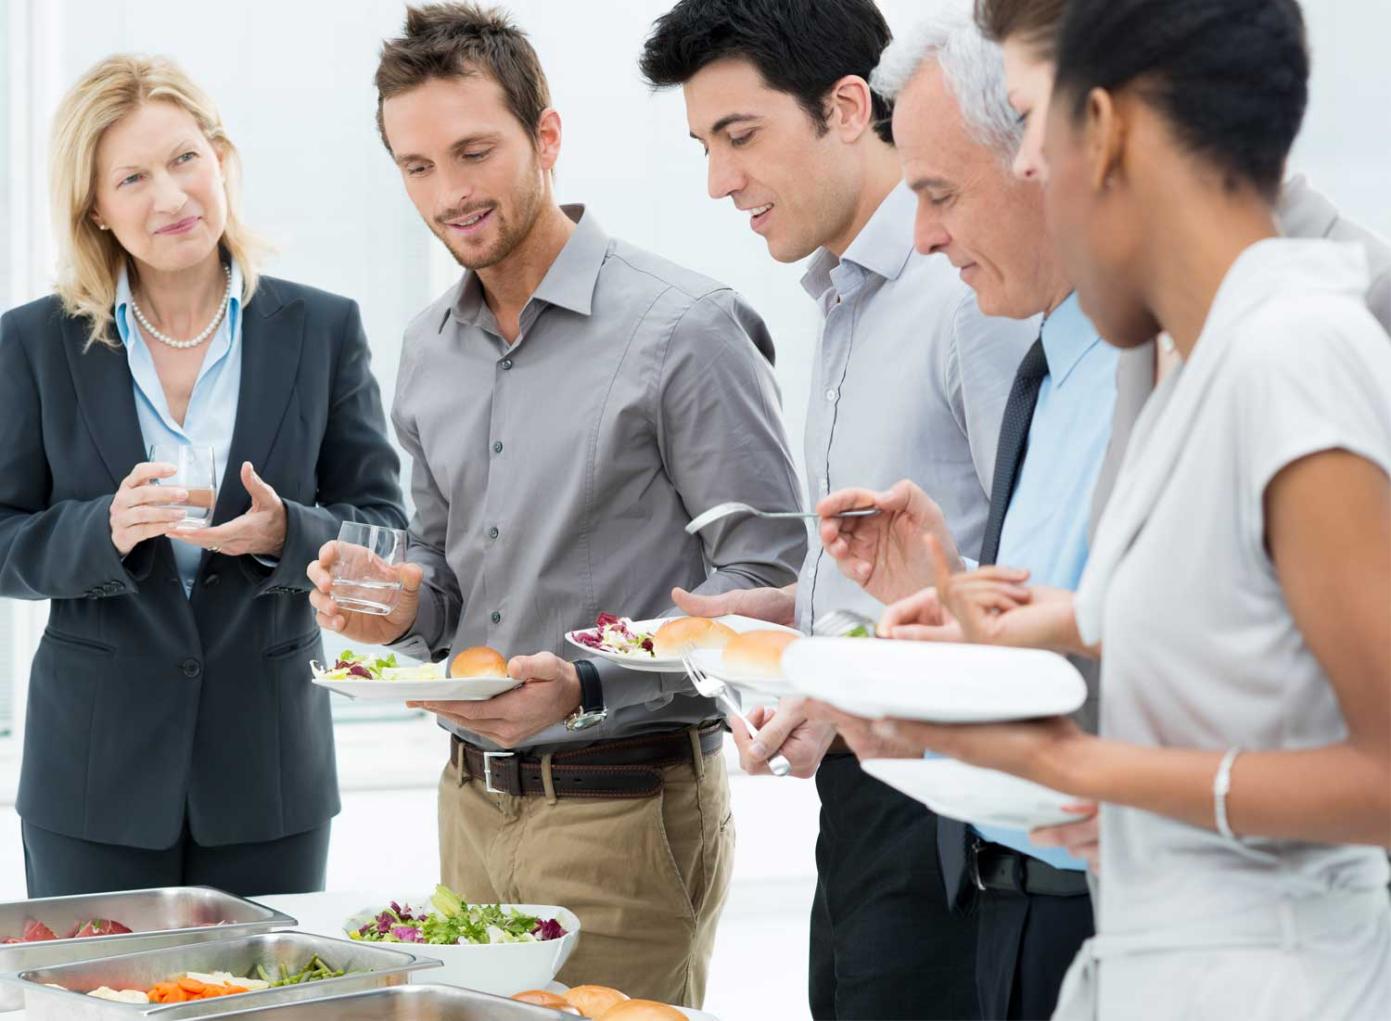 How Much Does Corporate Catering Cost?